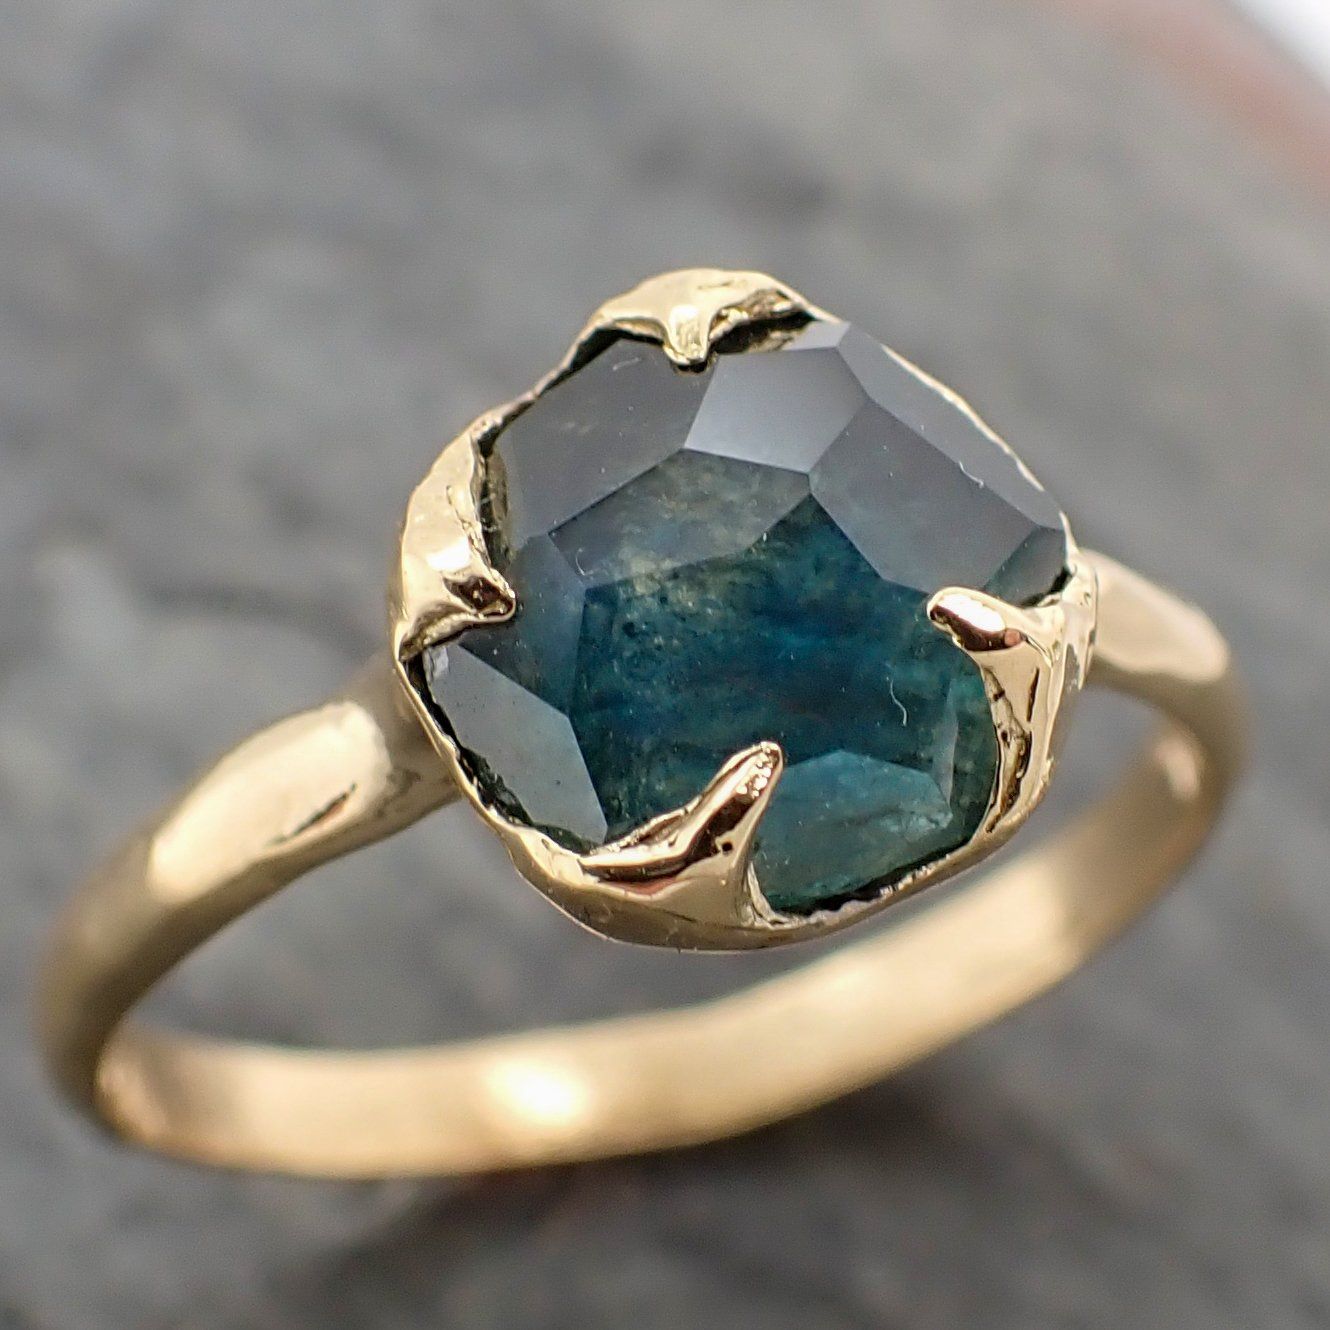 partially faceted montana sapphire solitaire 18k yellow gold engagement ring wedding ring custom one of a kind gemstone ring 2269 Alternative Engagement